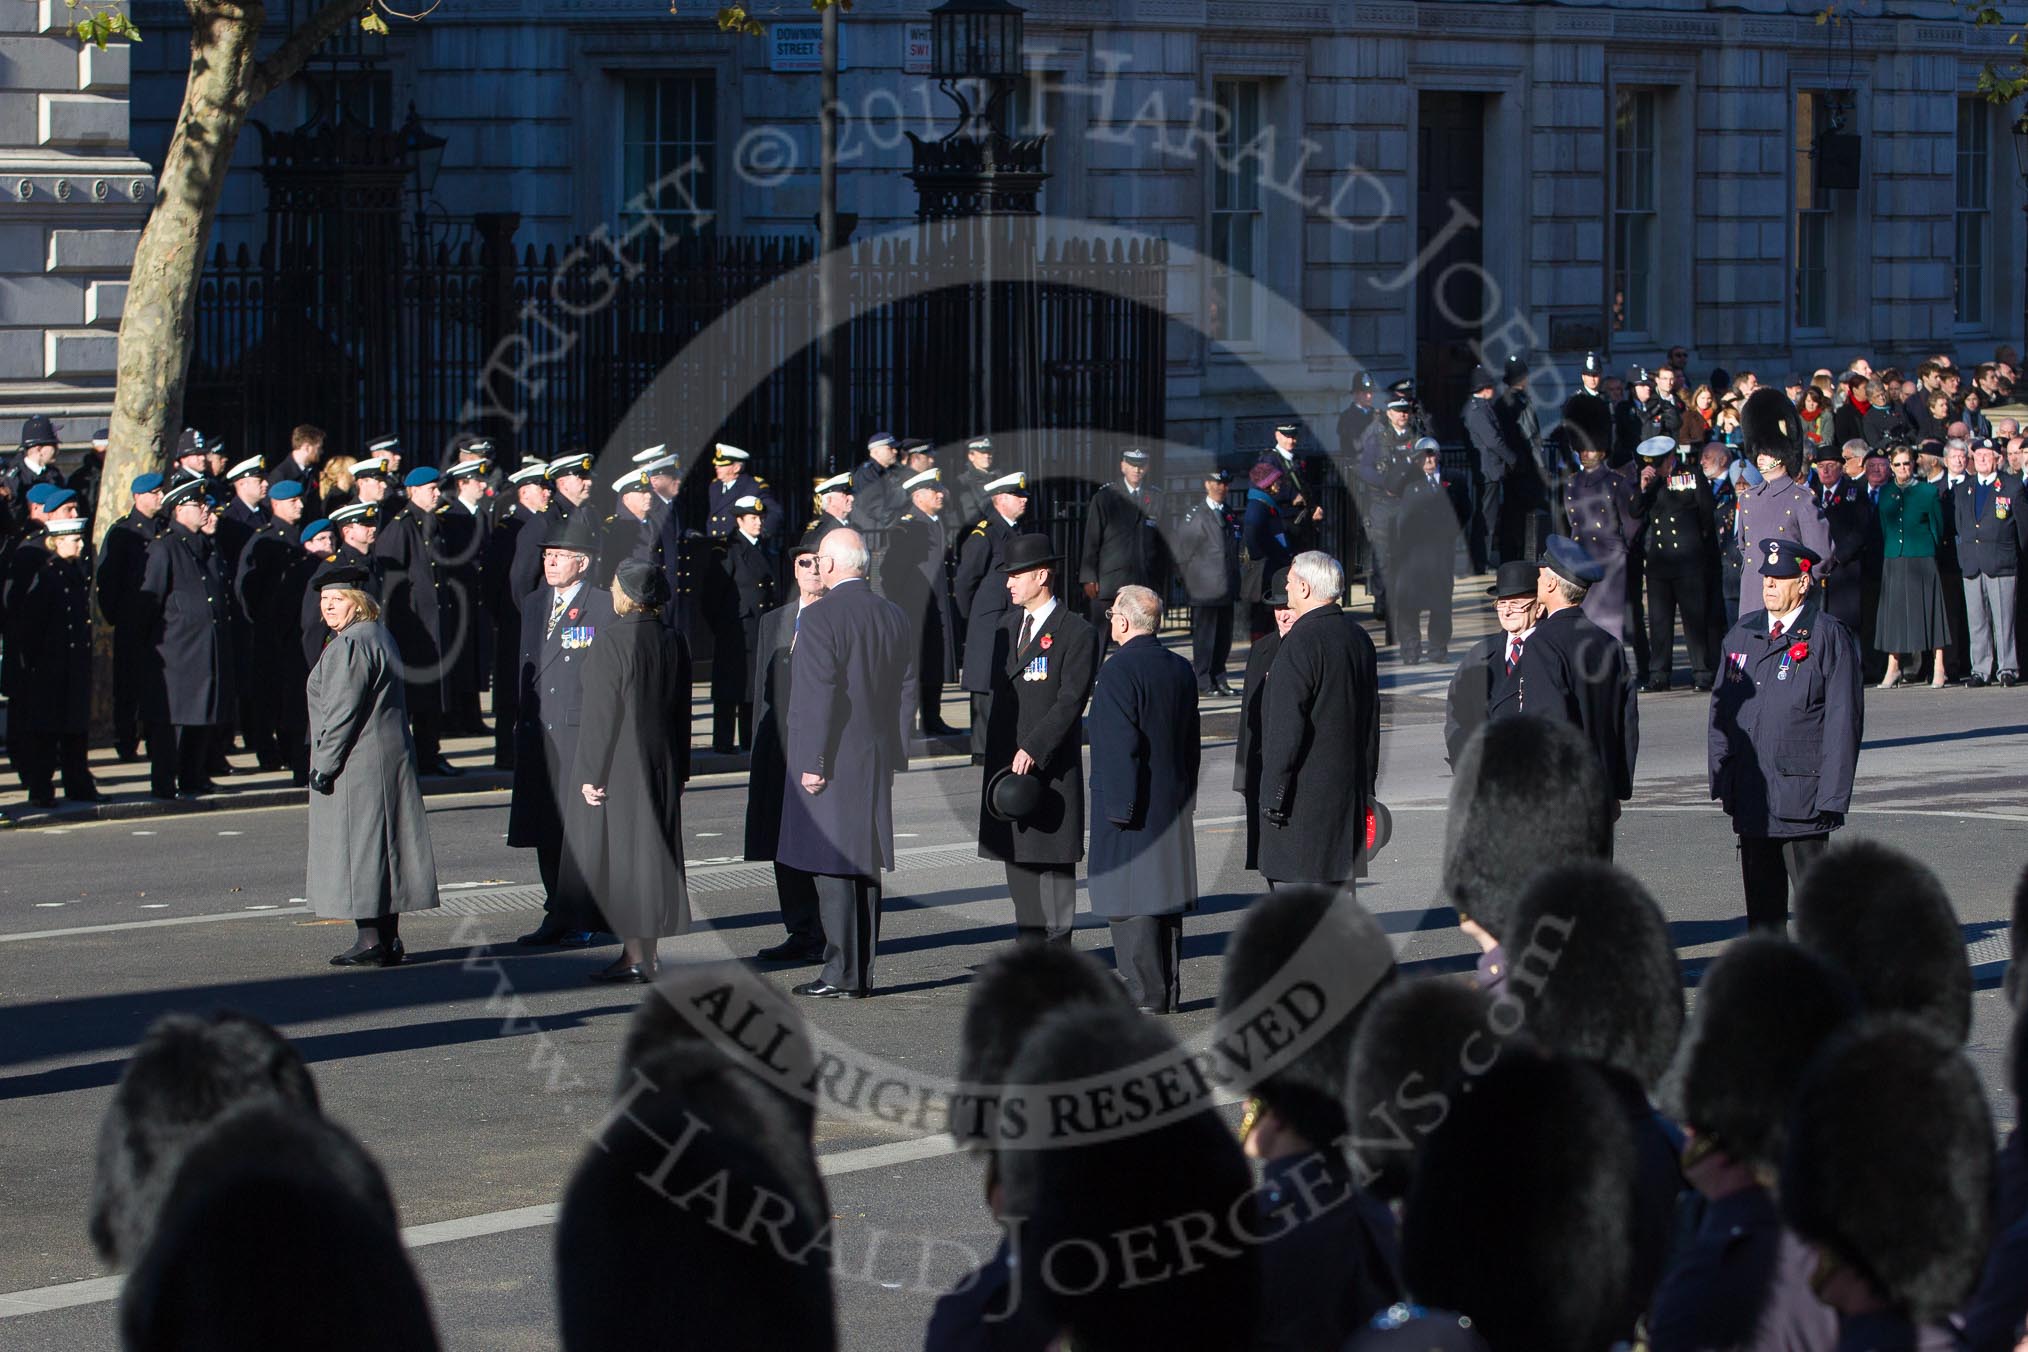 Remembrance Sunday 2012 Cenotaph March Past.
Whitehall, Cenotaph,
London SW1,

United Kingdom,
on 11 November 2012 at 11:29, image #19